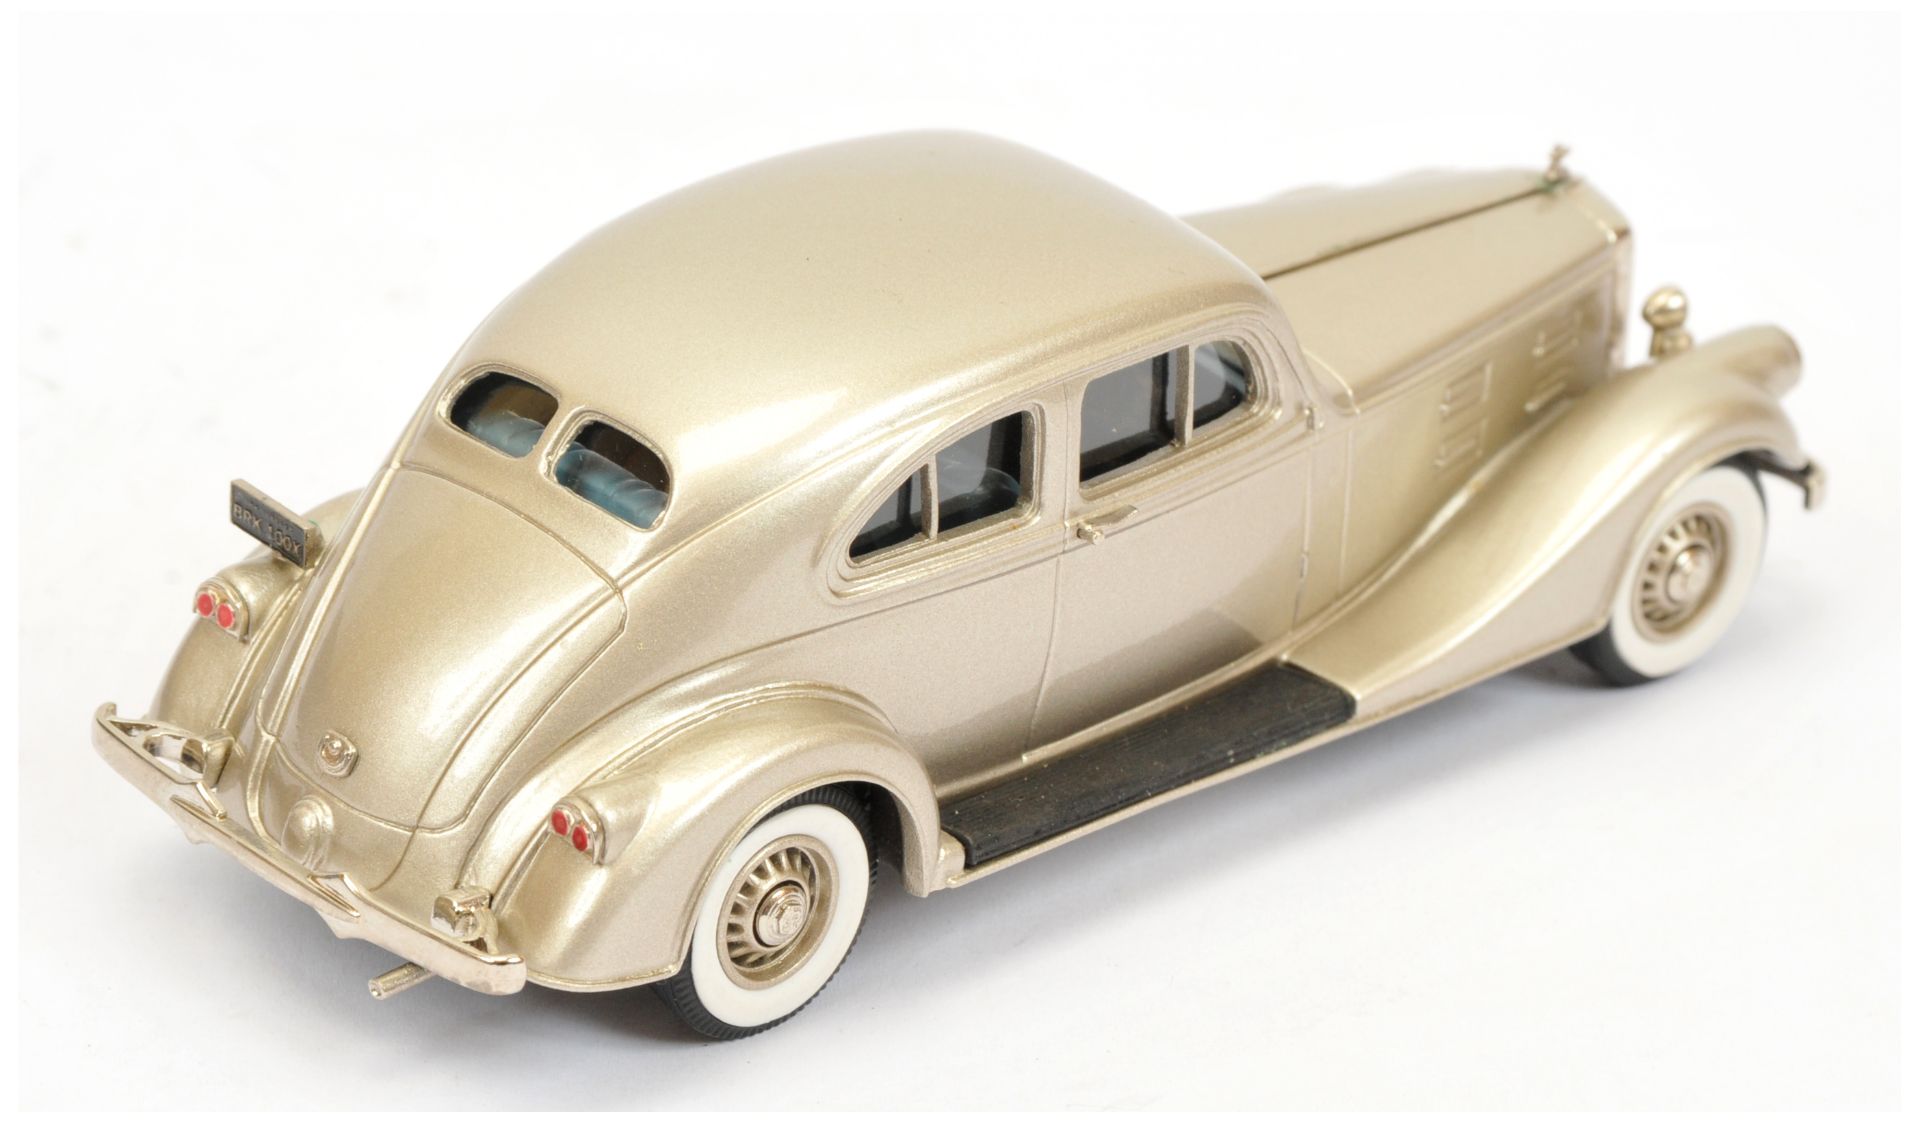 Brooklin 1934 Pierce Silver Arrow Coupe BRK100X Anniversary model Limited Edition - Image 2 of 2